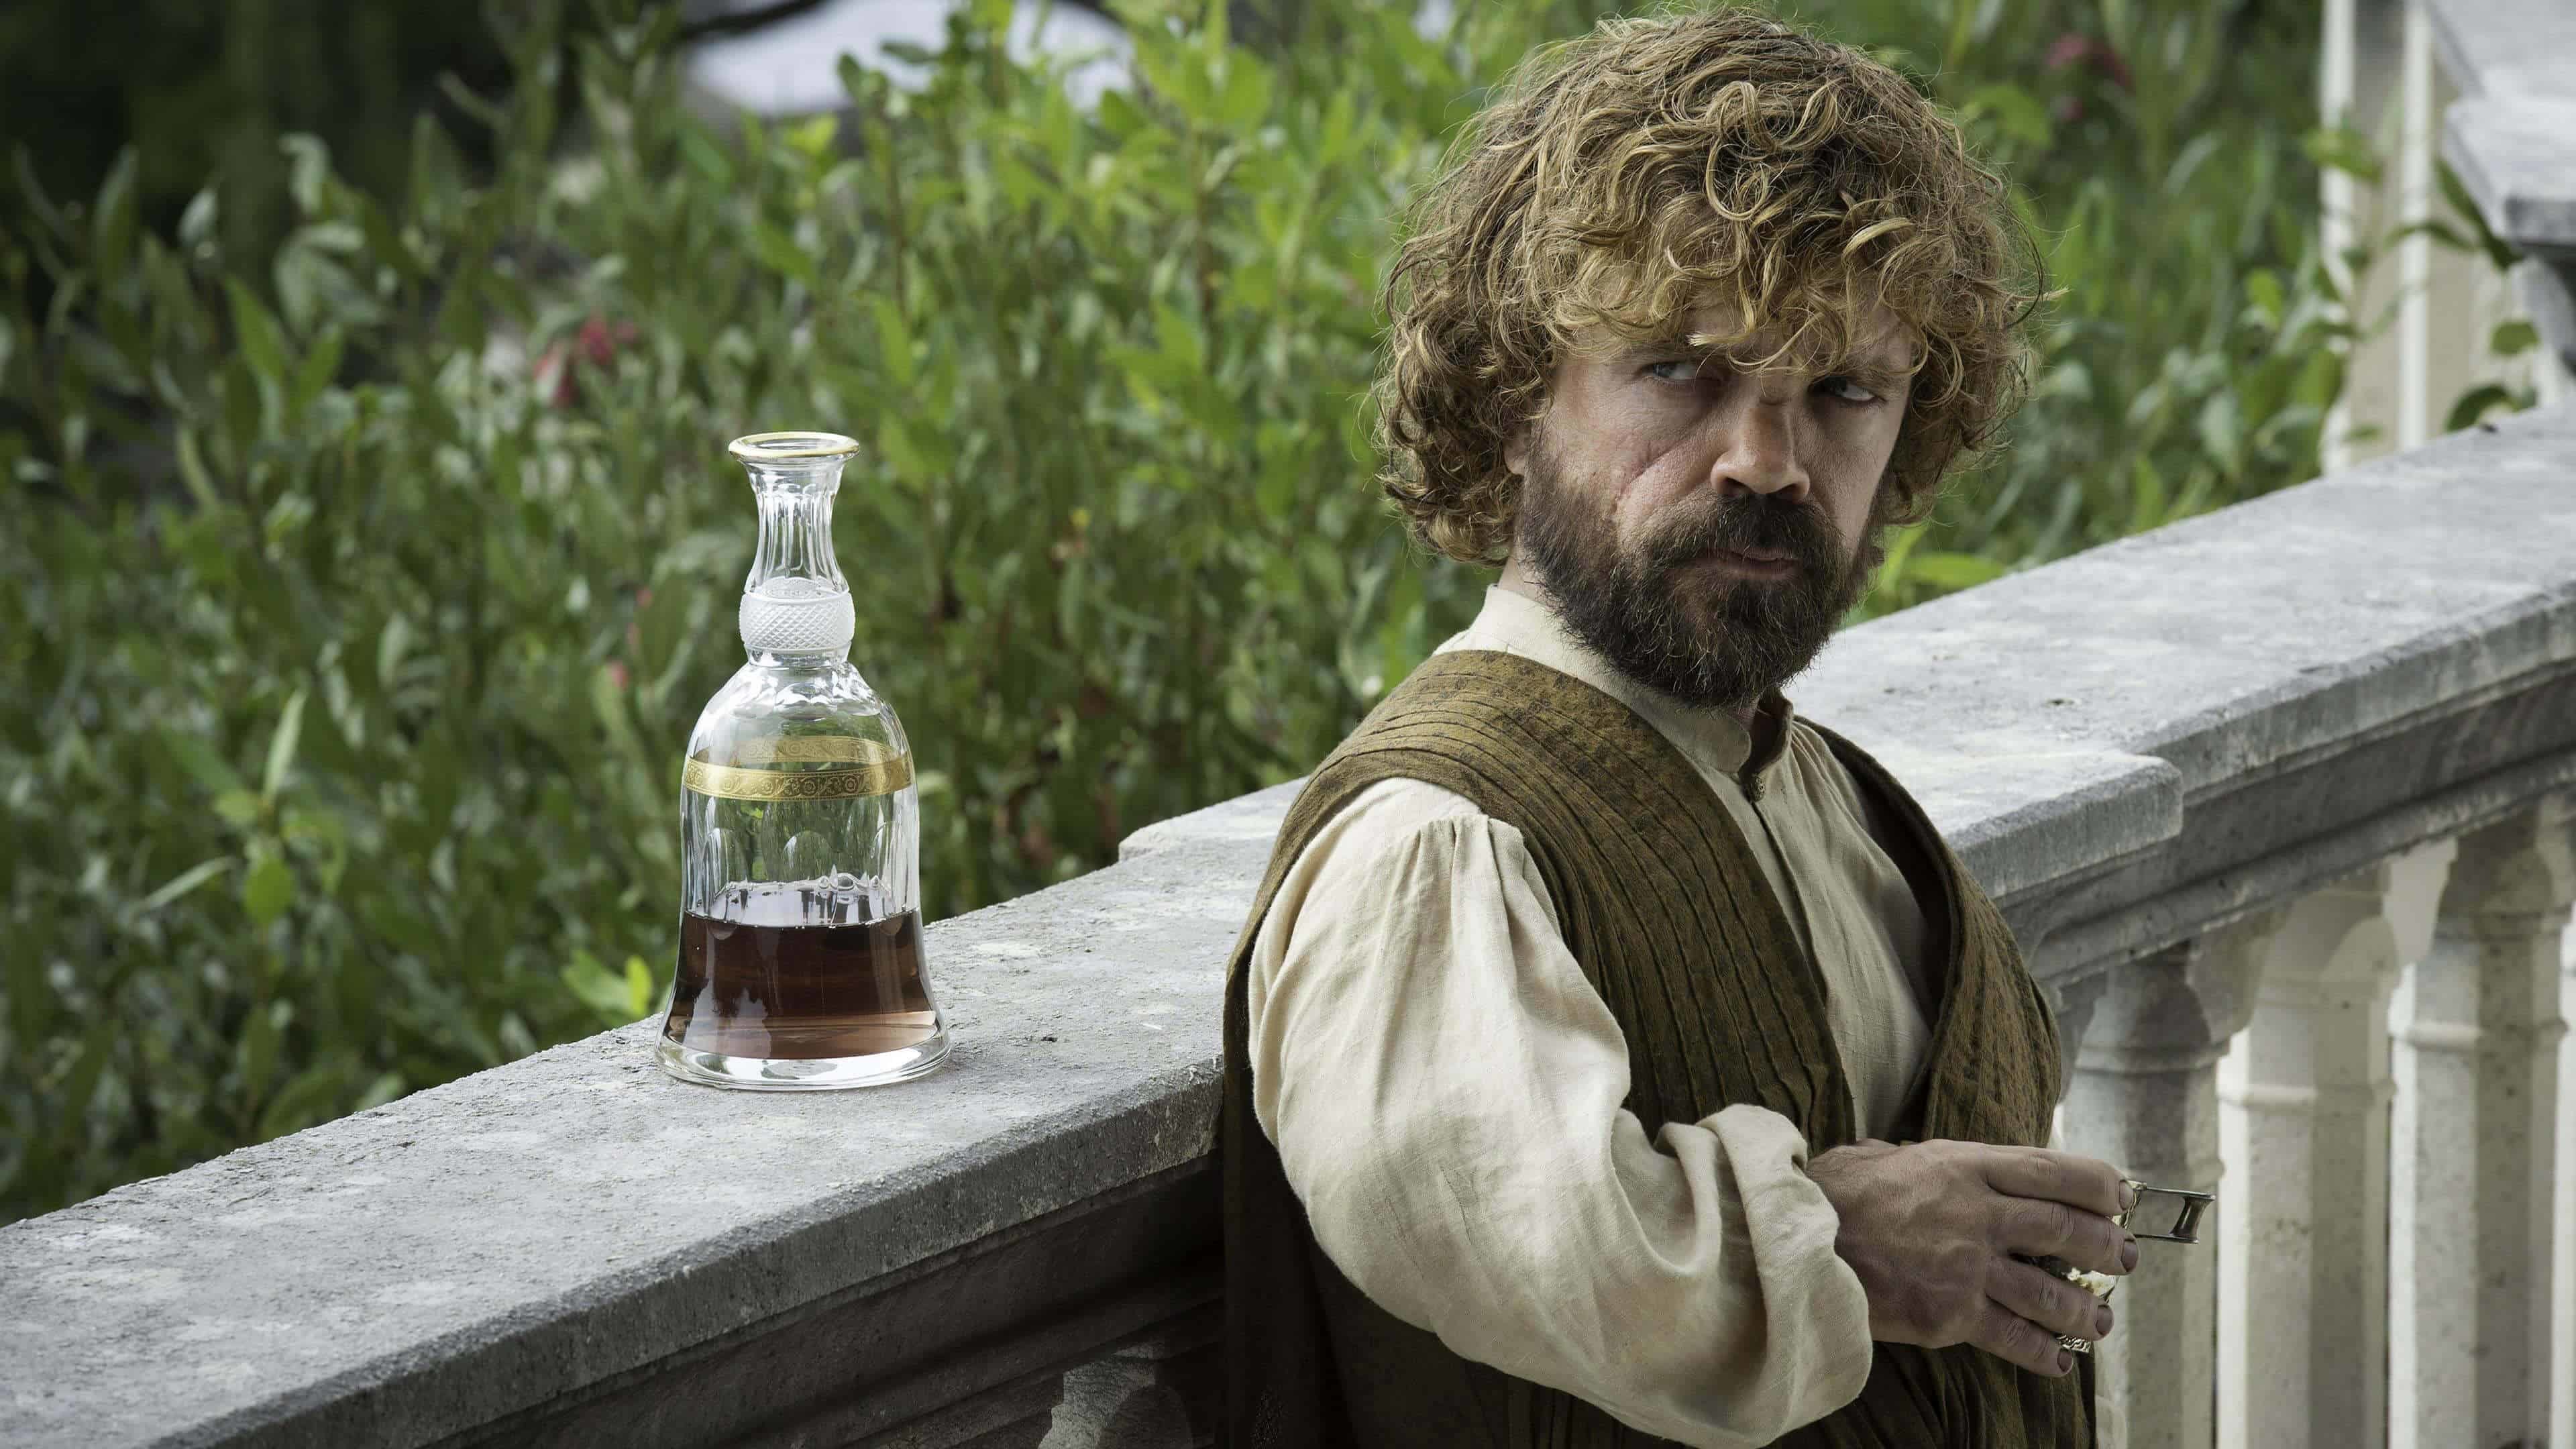 Tyrion Lannister Game Of Thrones Seaon 7 Wallpapers